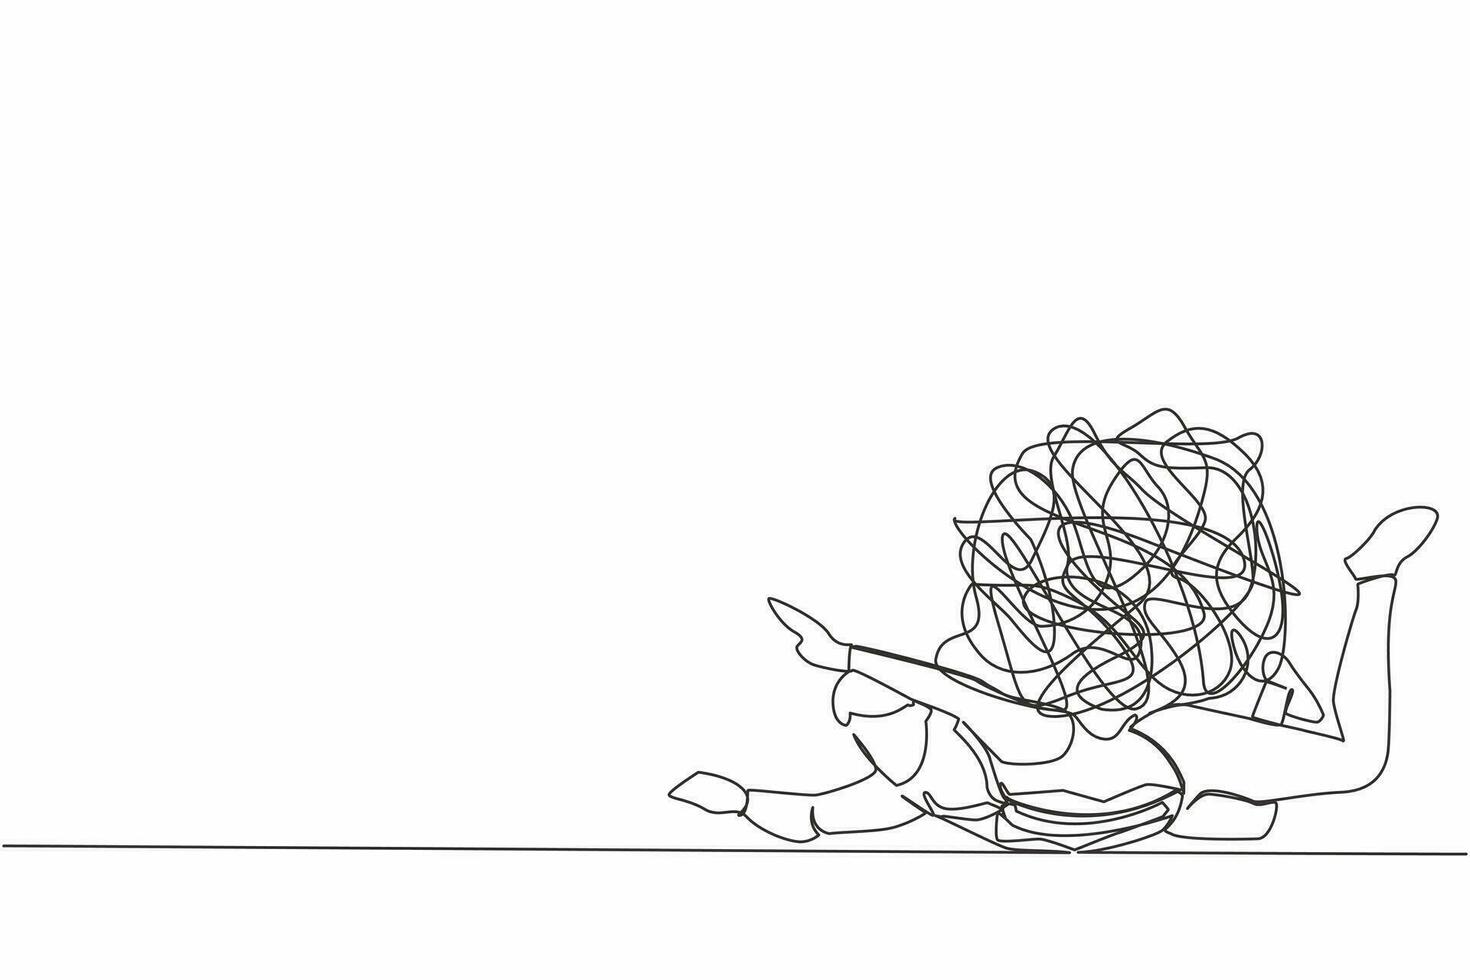 Single continuous line drawing depressed businessman under heavy messy line burden. Stress burden, anxiety from work difficulty, overload, economic crisis problem. One line design vector illustration